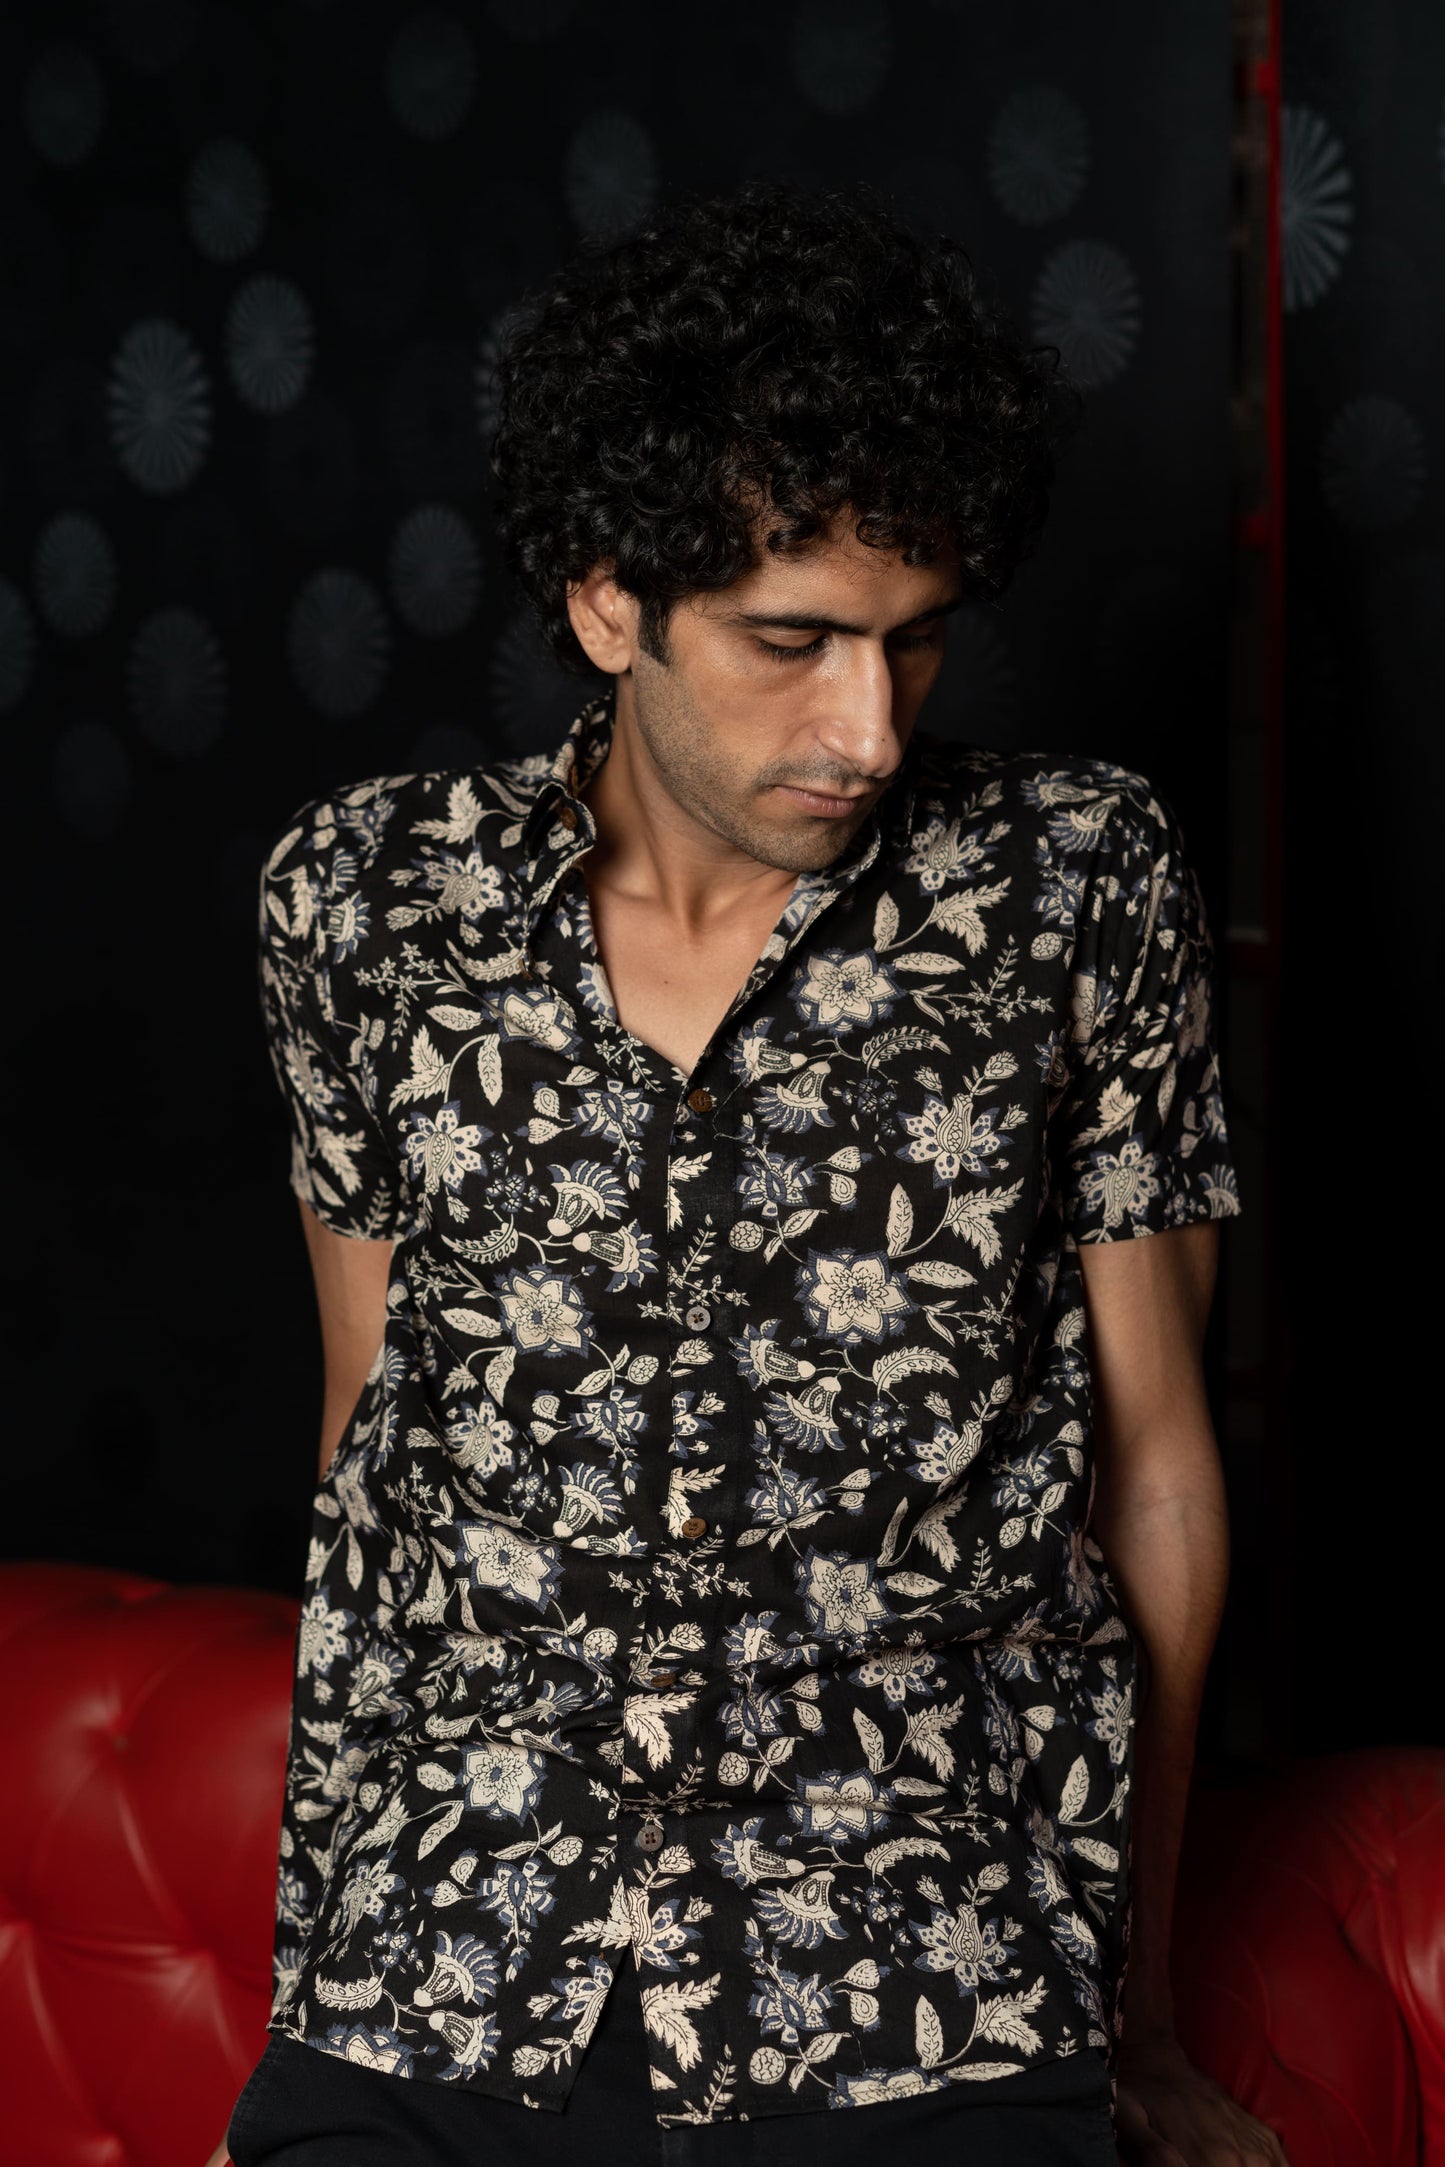 The Black And Off-White Half Sleeves Shirt With All-Over Floral Print